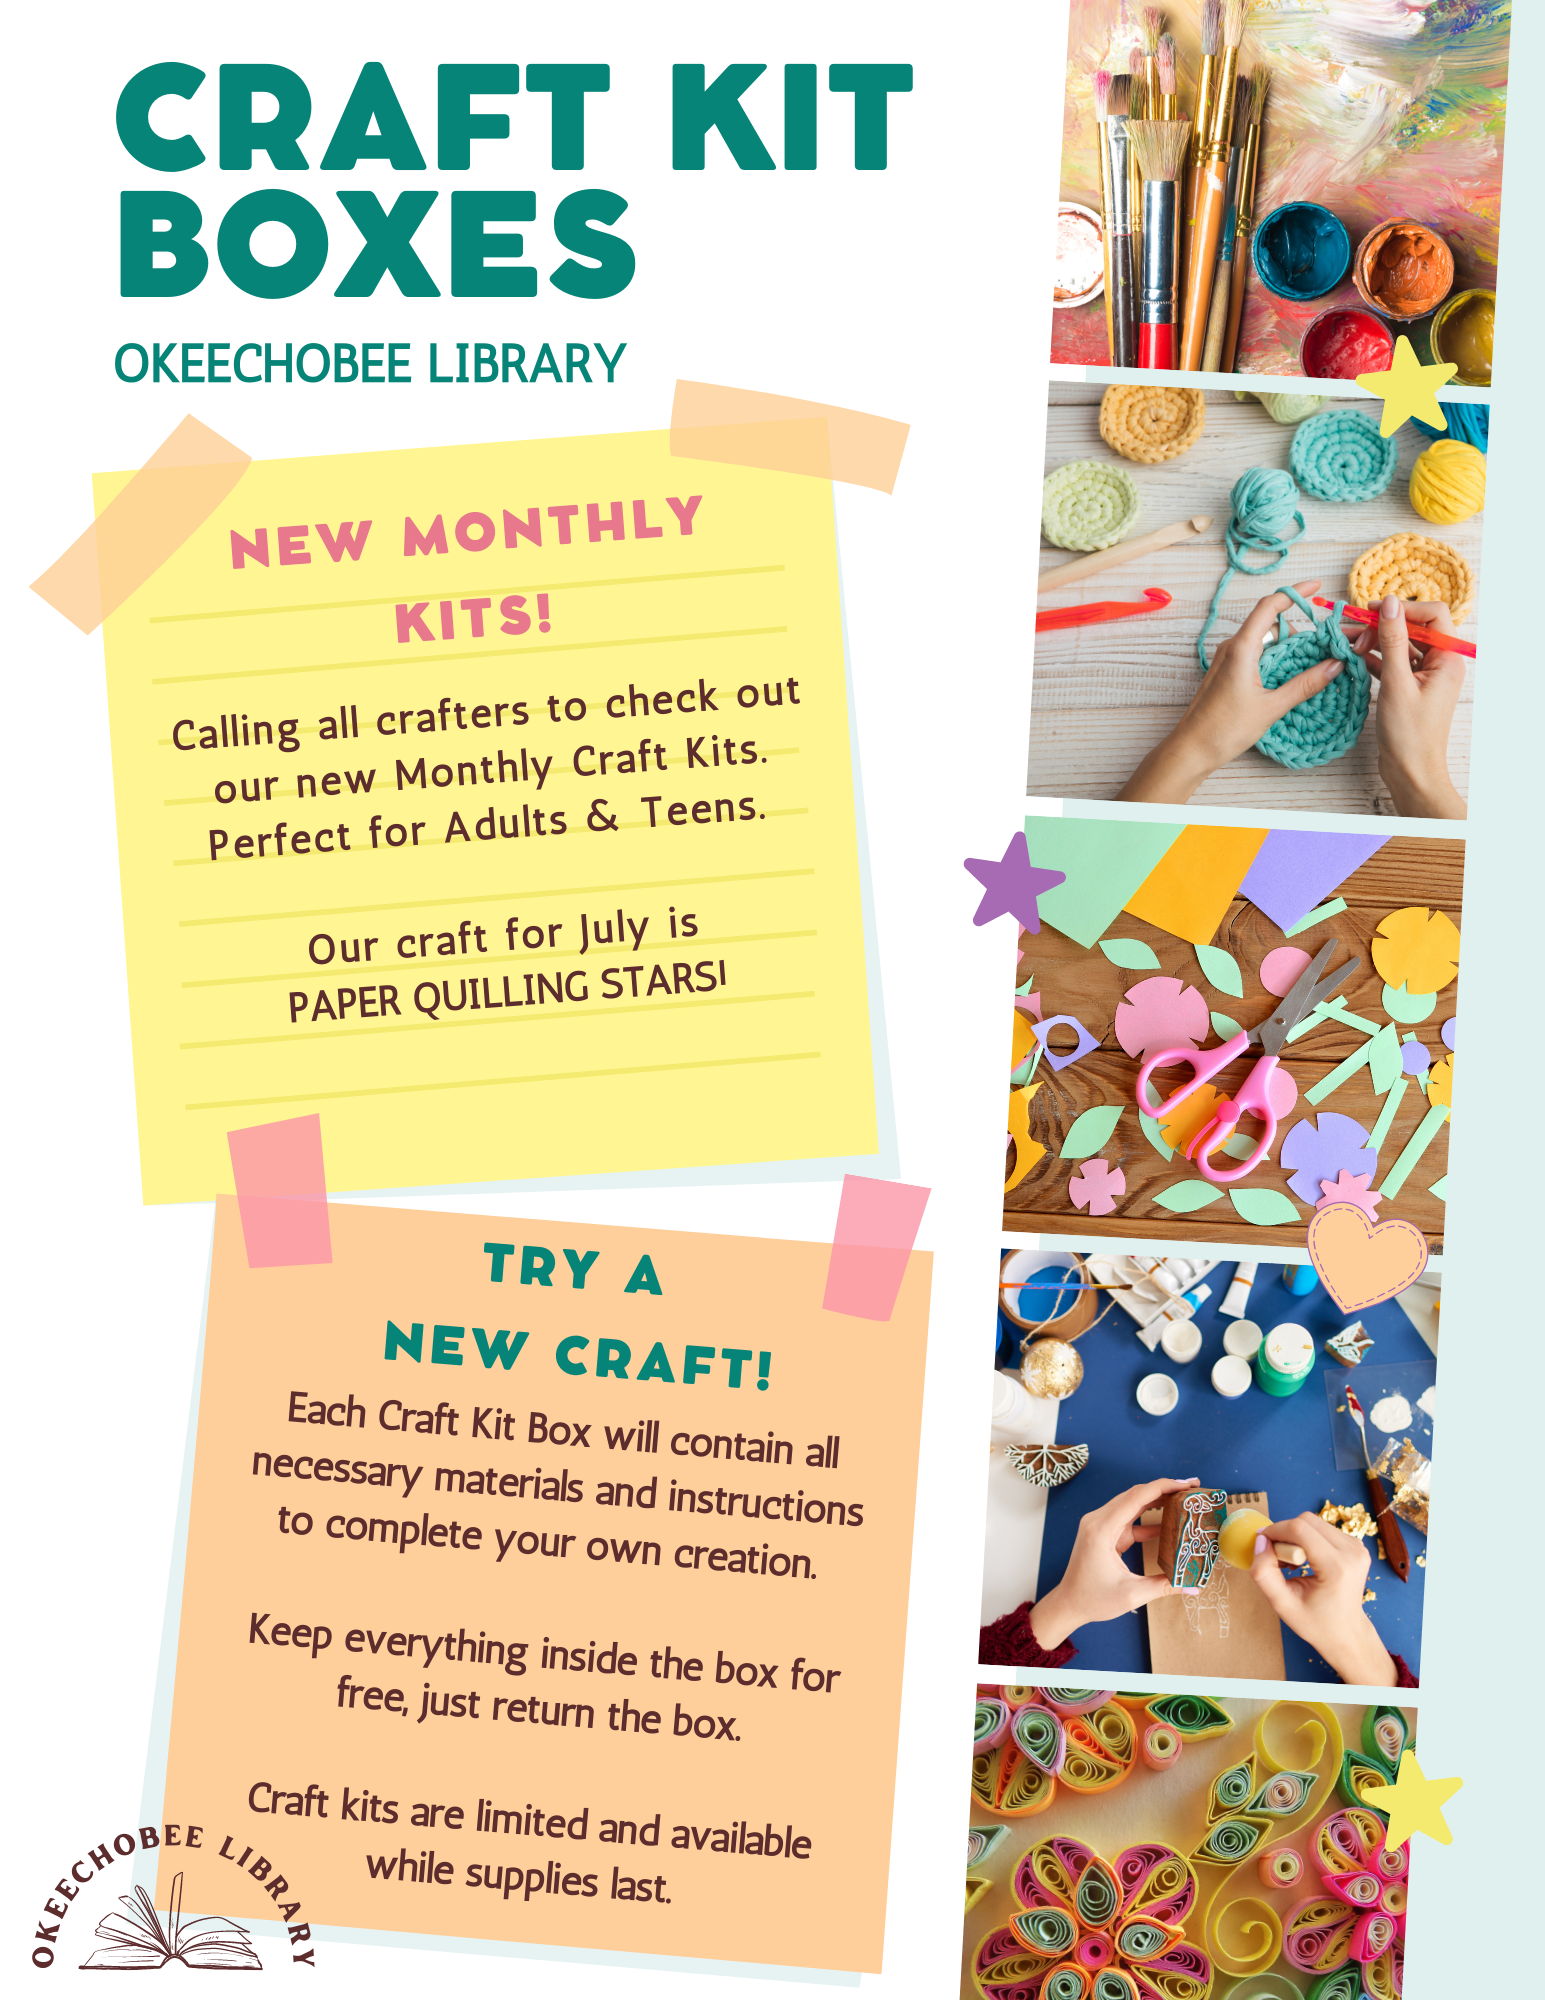 Don't forget to check out July's Craft Kit: Paper Quill Stars! Each Craft Kit Box will contain all necessary materials and instructions. Craft kits are limited and available while supplies last.